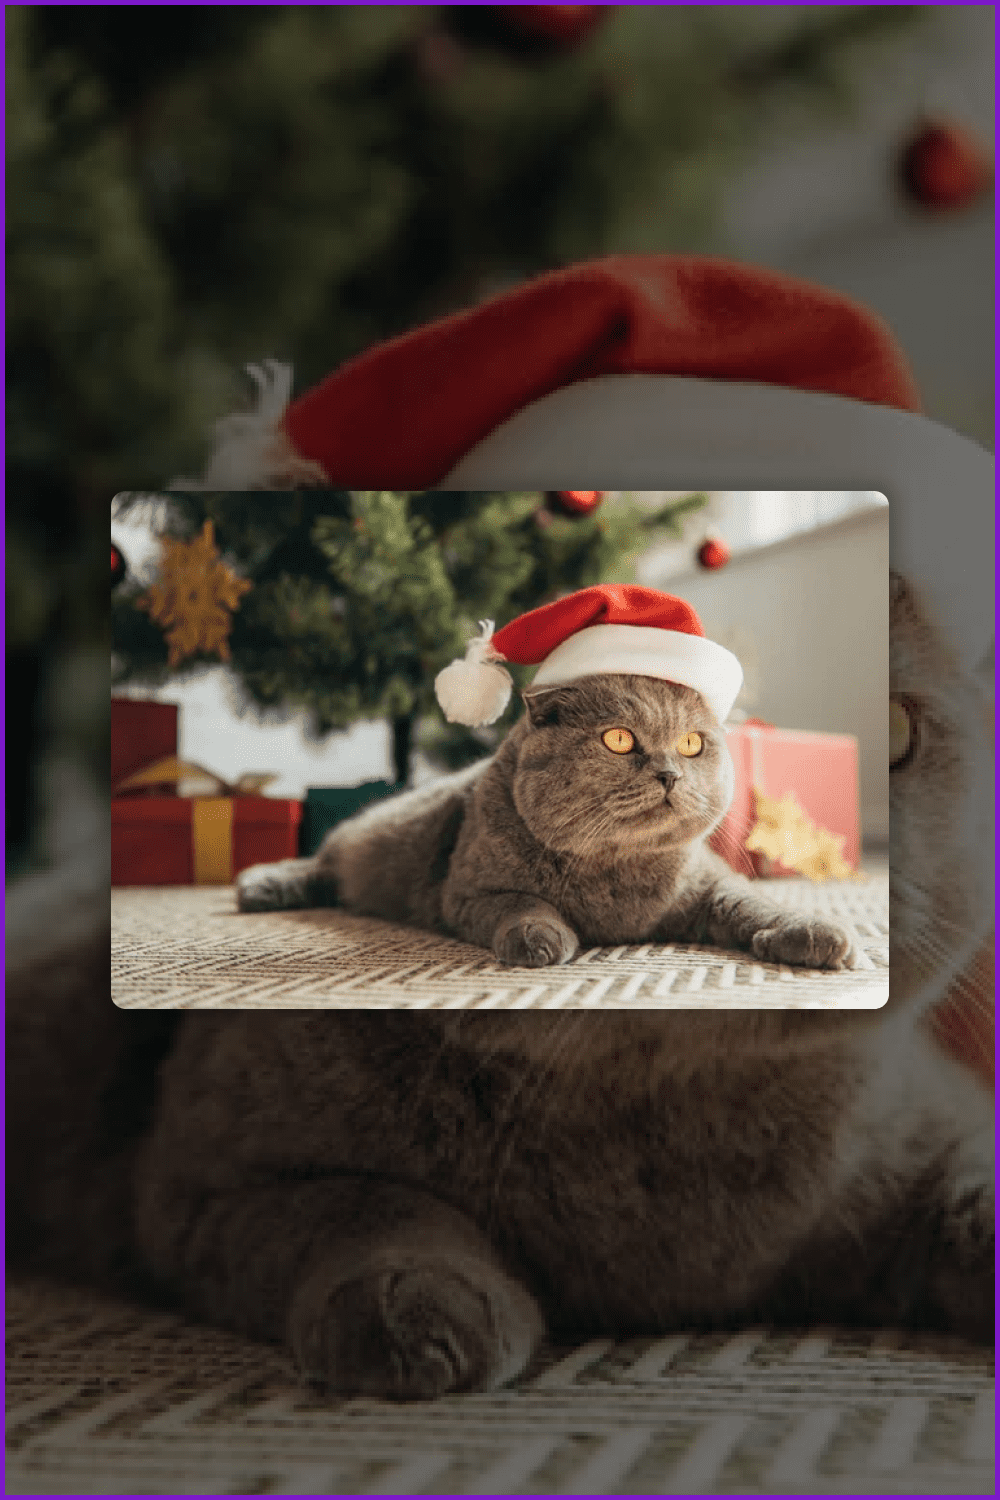 Photo of a gray Scottish cat in a red Santa Claus hat.